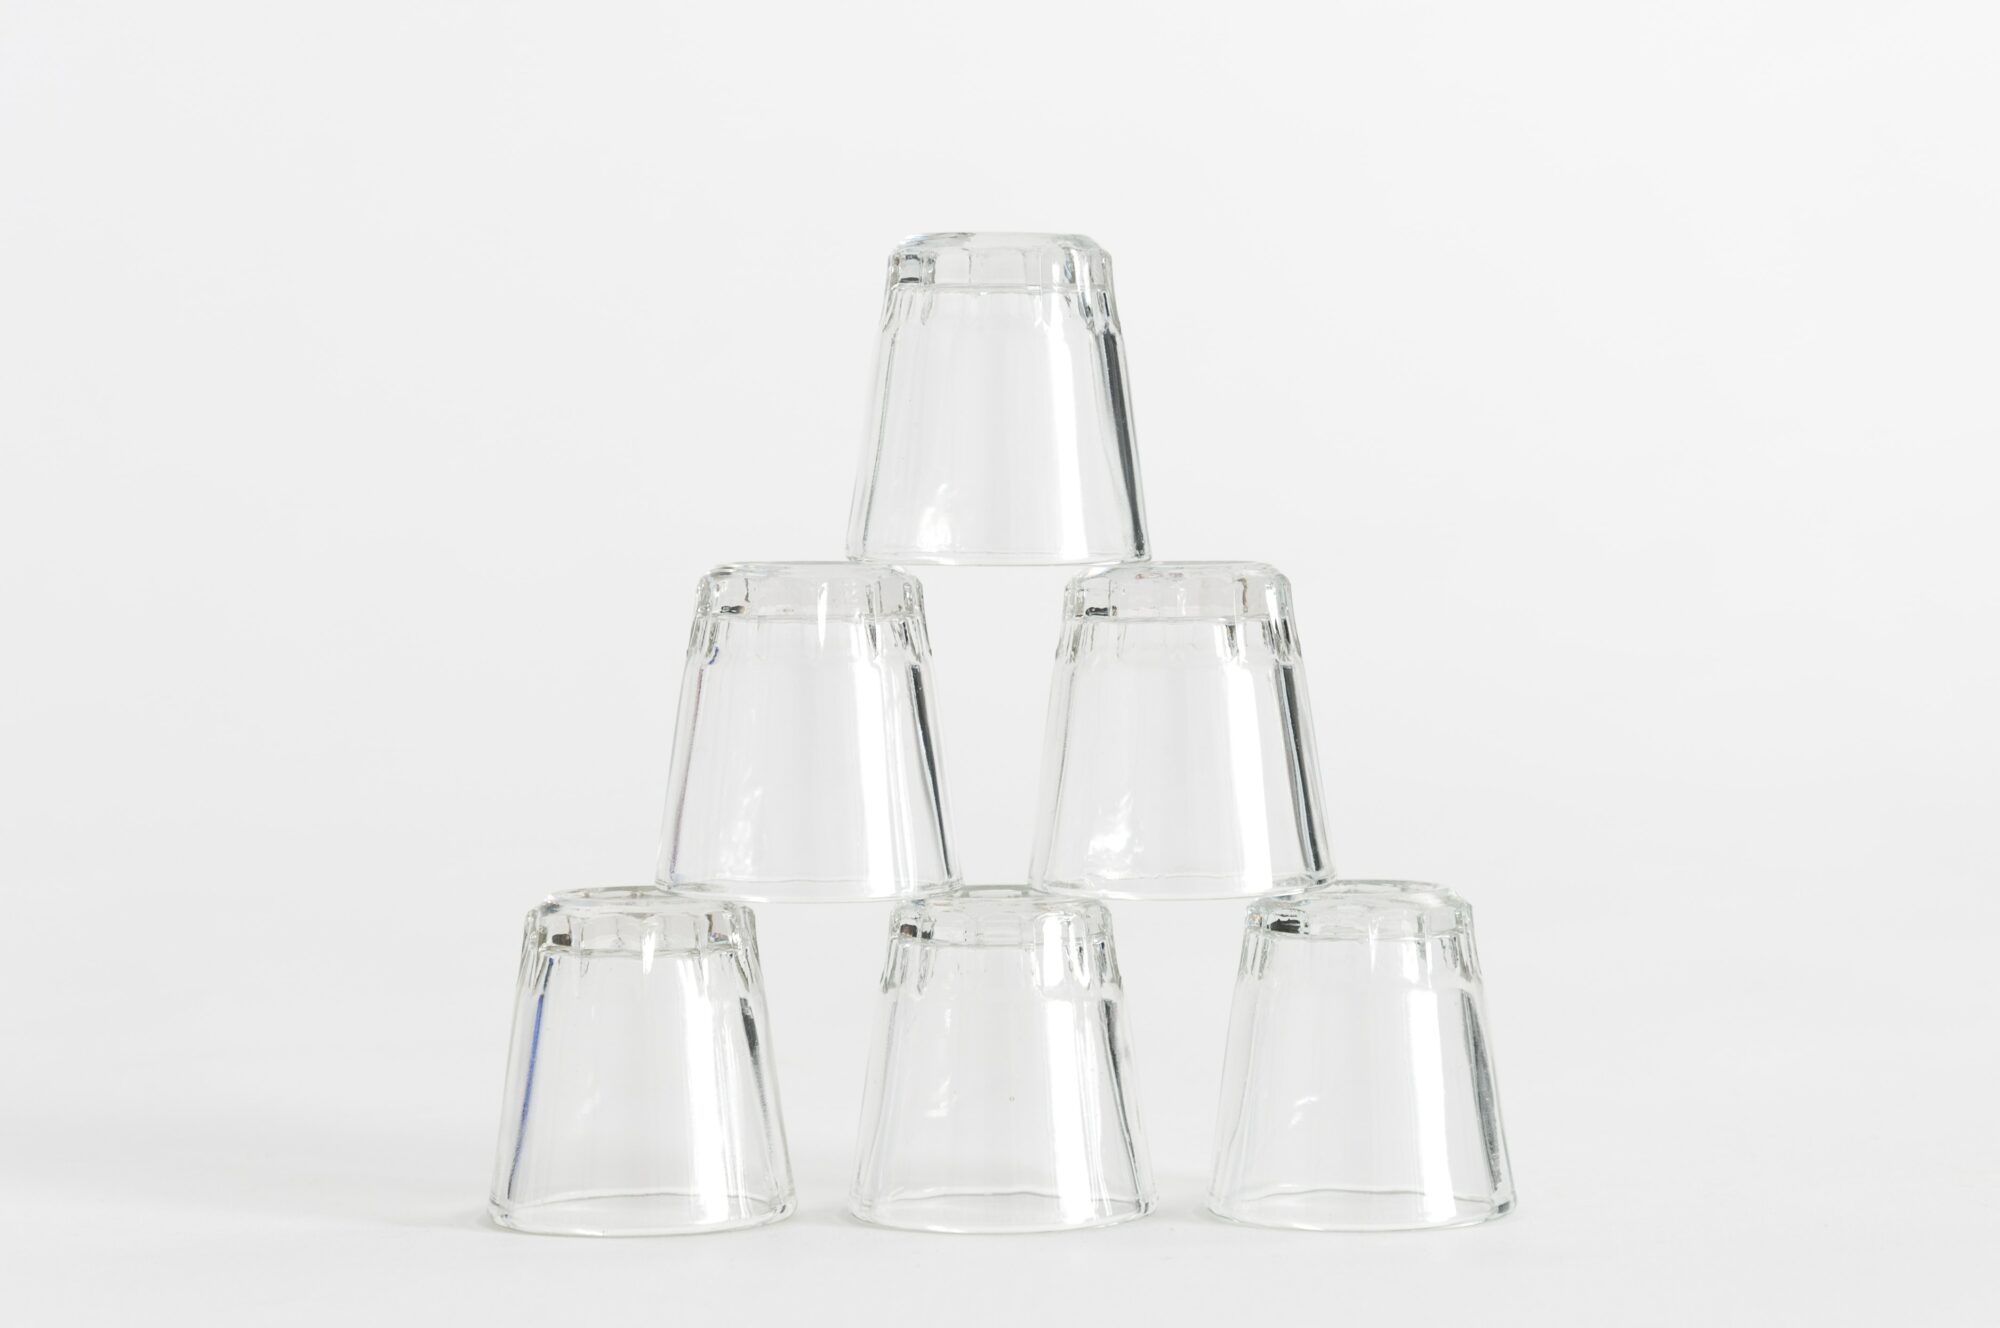 empty glasses stacked on top of each other